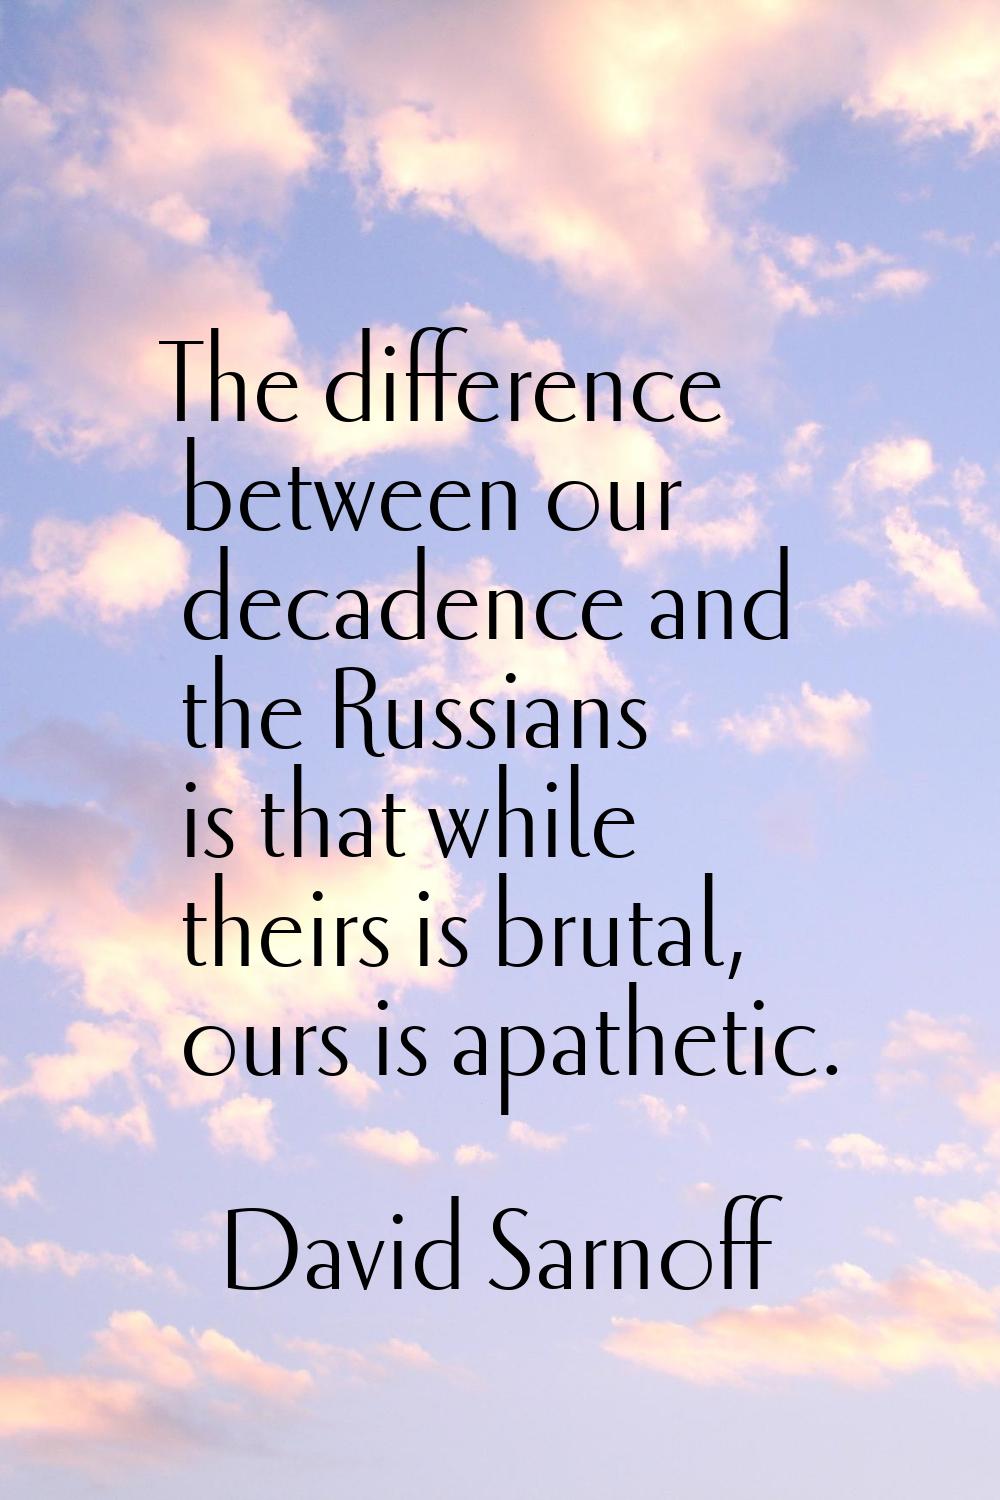 The difference between our decadence and the Russians is that while theirs is brutal, ours is apath